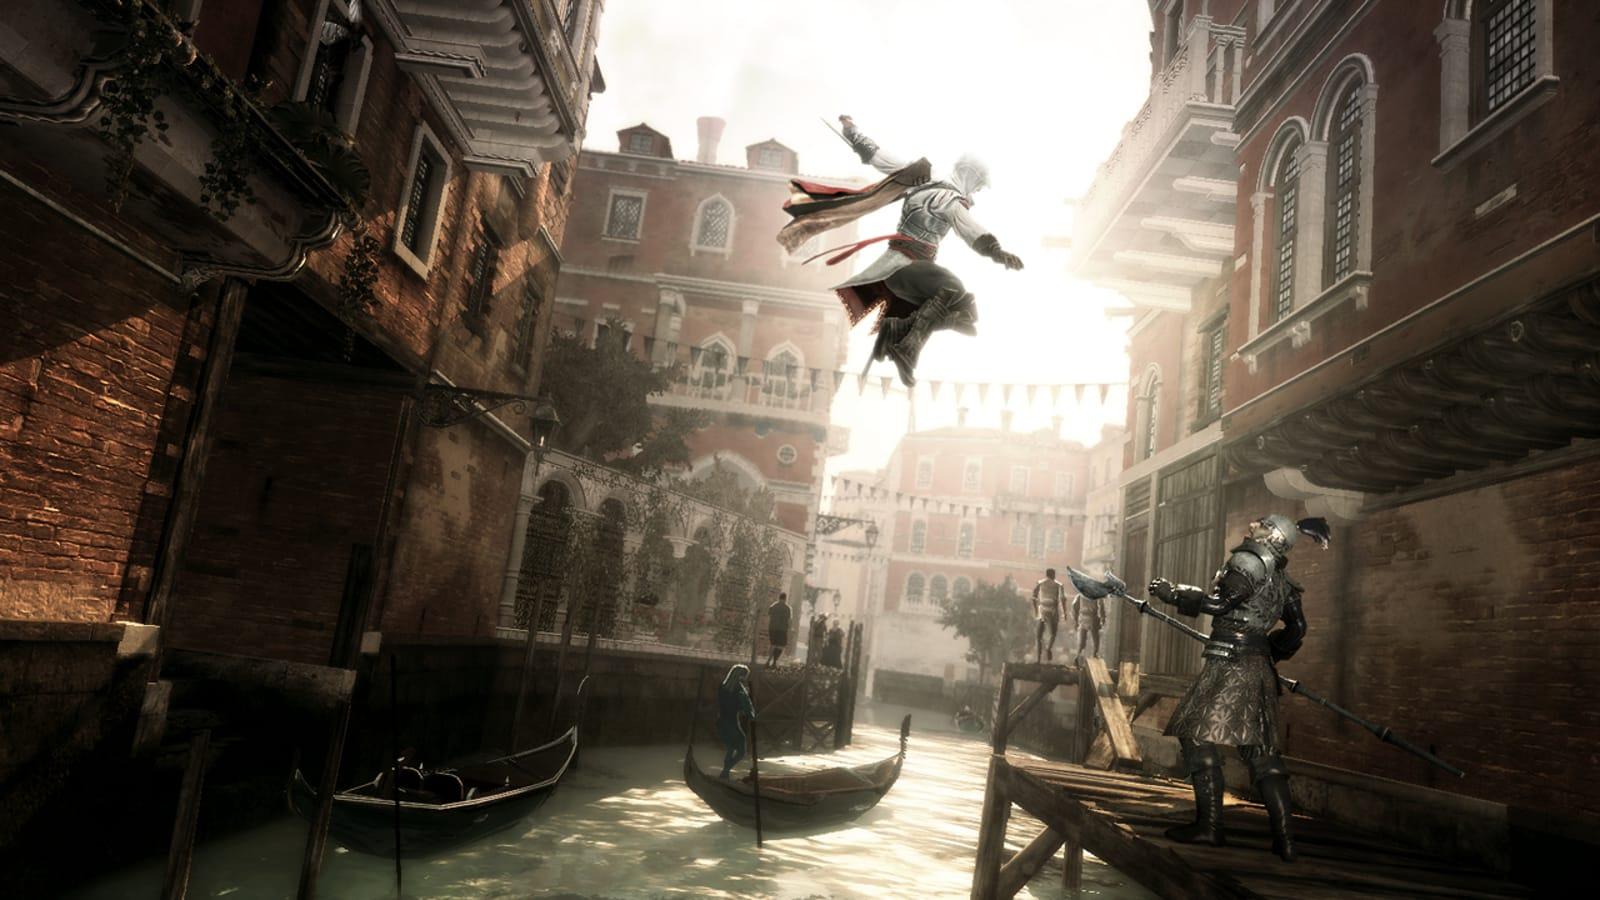 The 10 Best Assassin's Creed Games - IGN